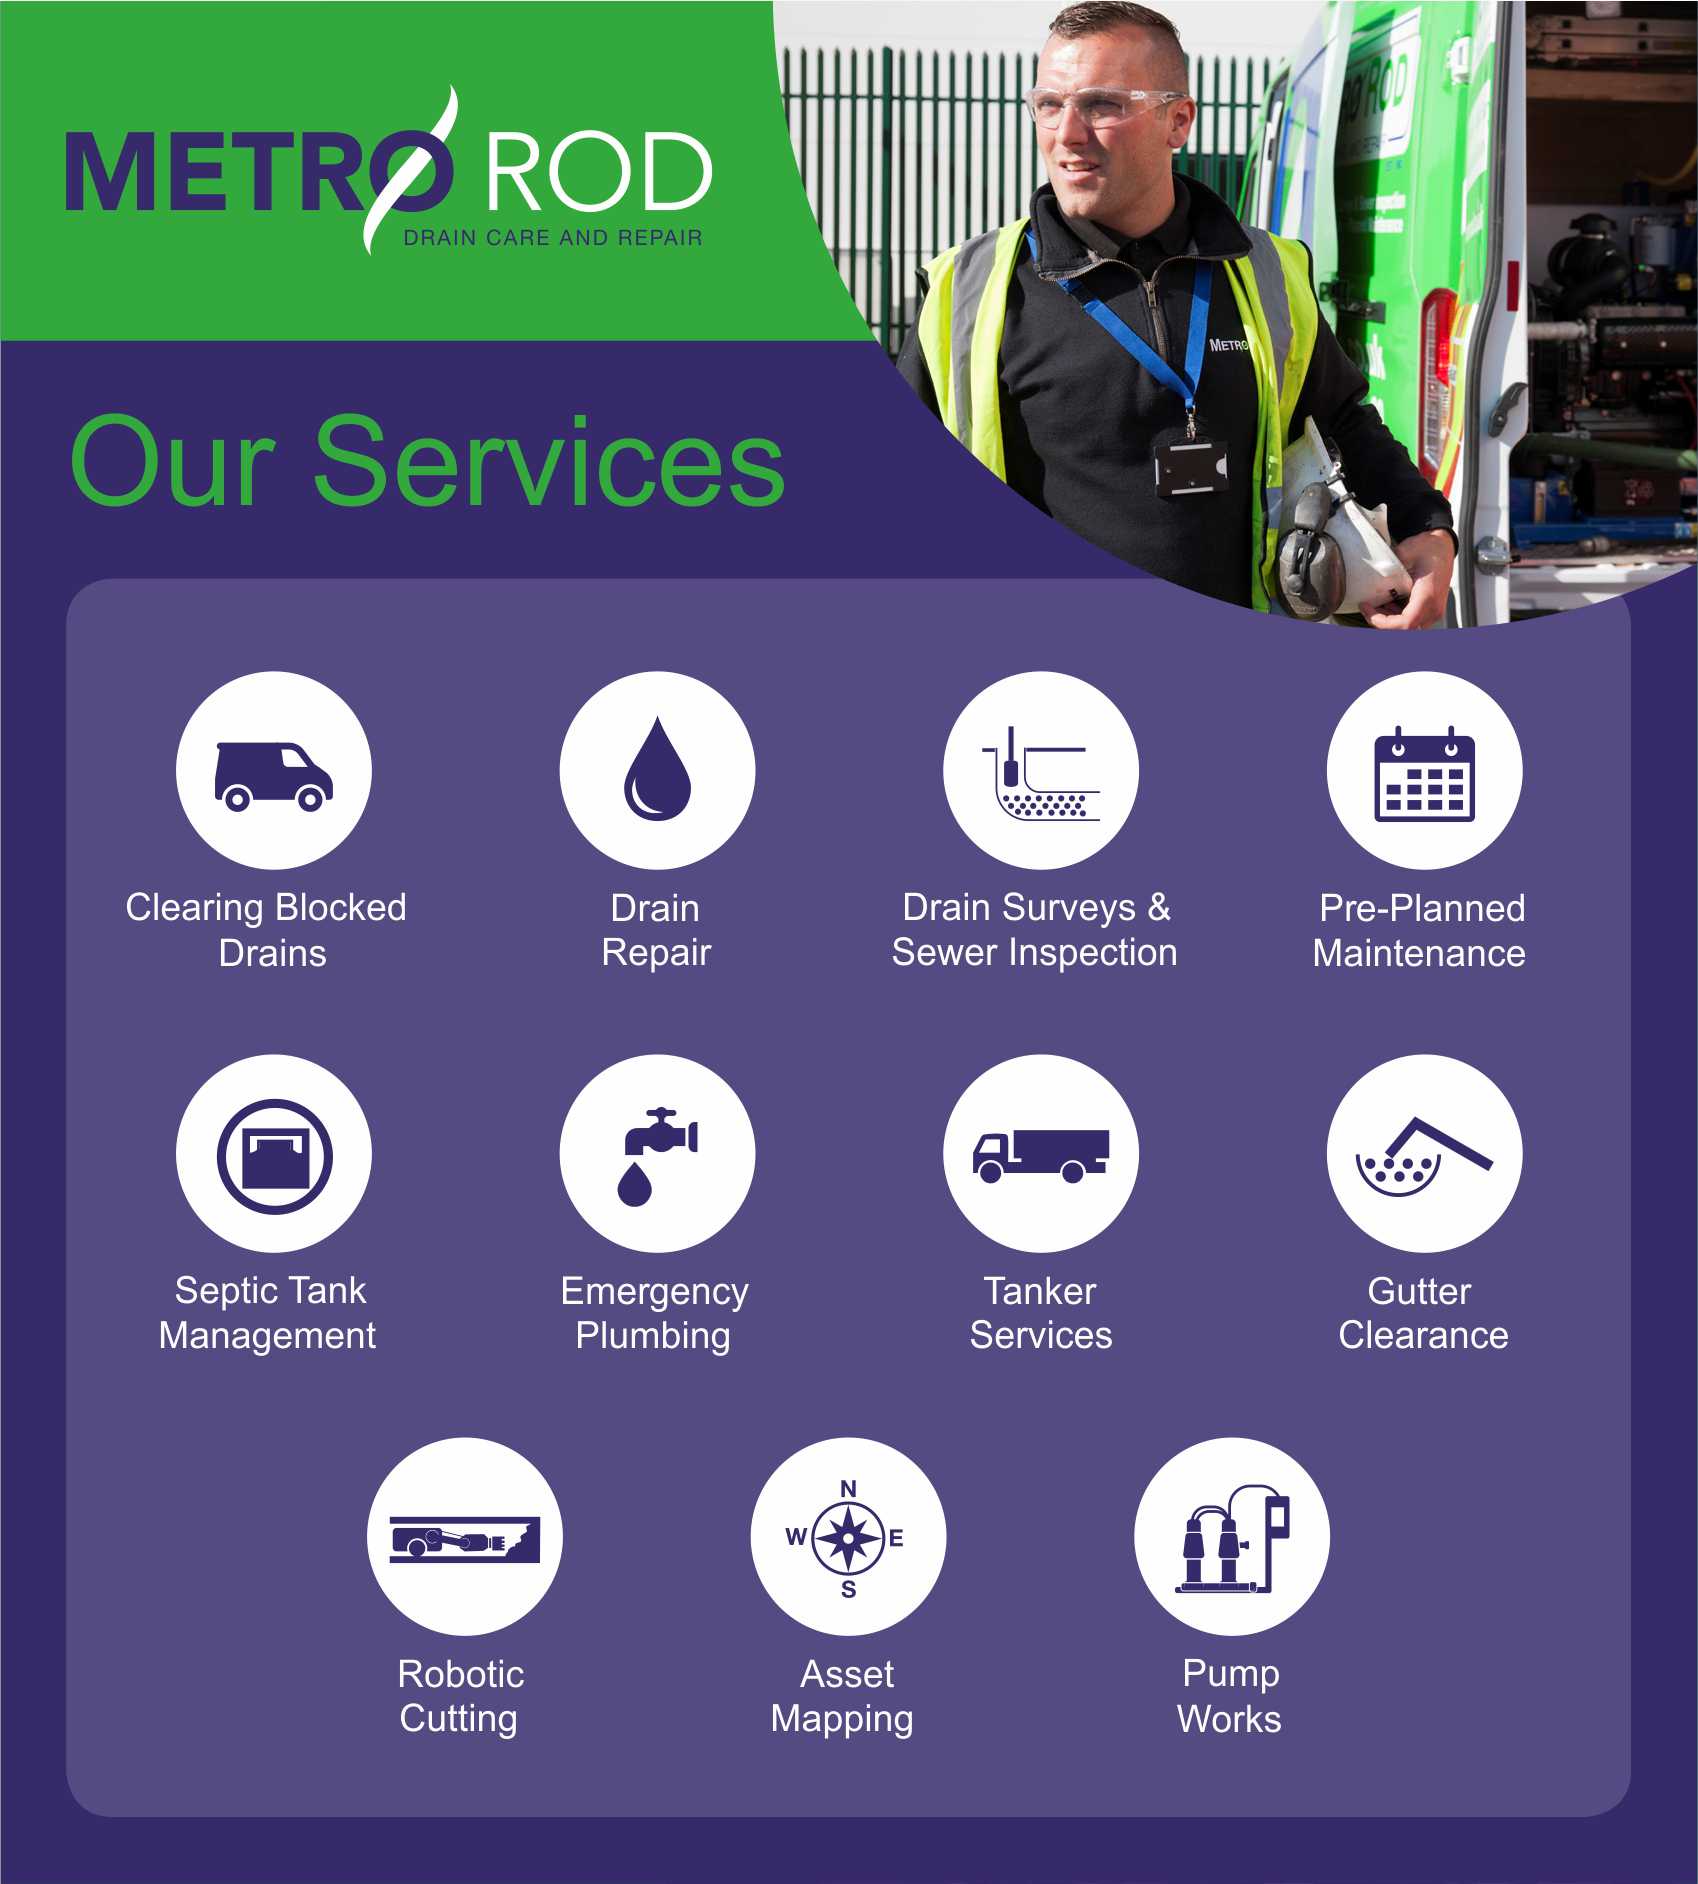 NOT JUST BLOCKED DRAINS – SERVICES FROM METRO ROD SWANSEA